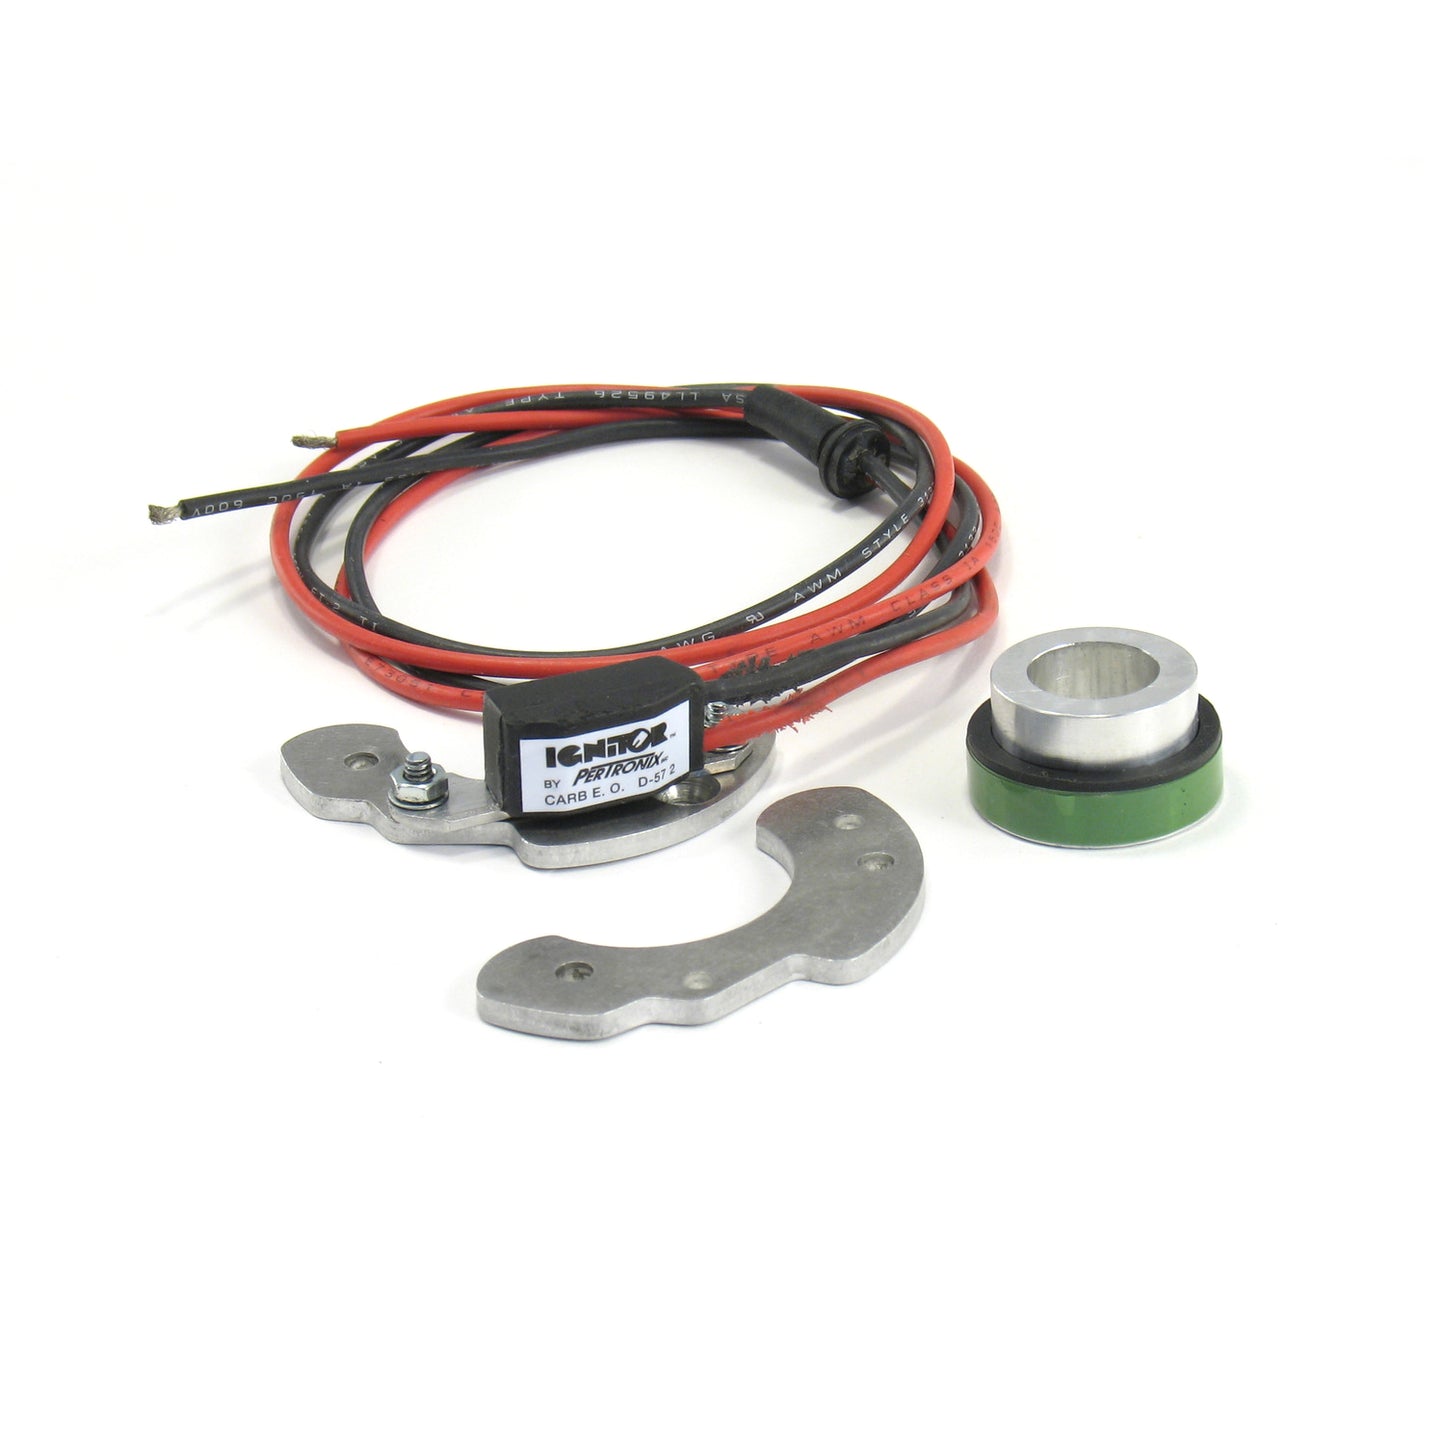 PerTronix 1249 Ignitor Ford 4 cyl